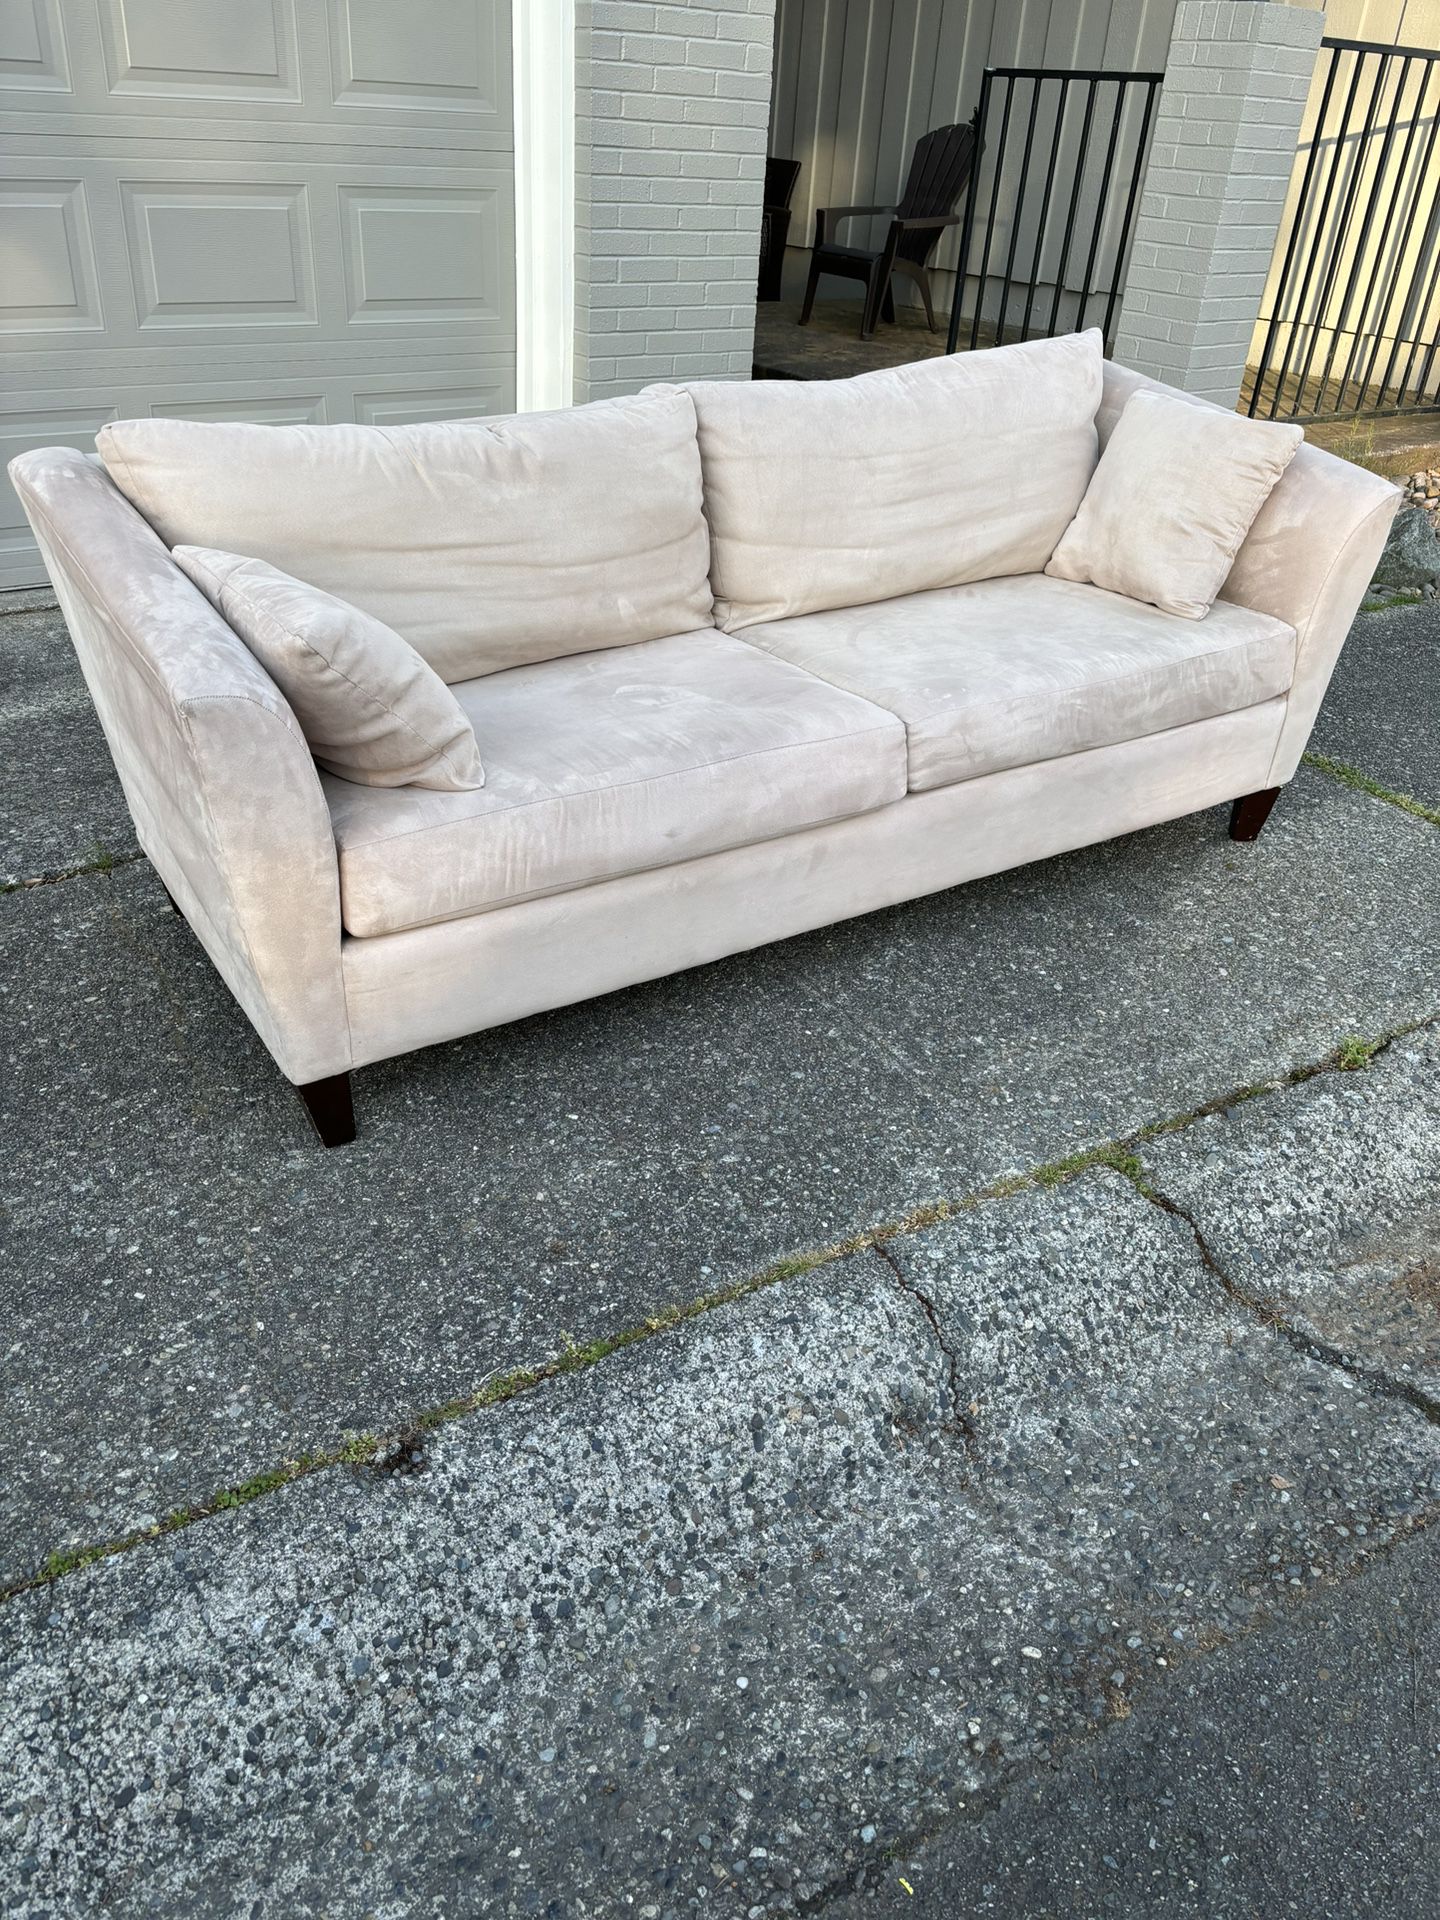 Beige Couch - FREE DELIVERY